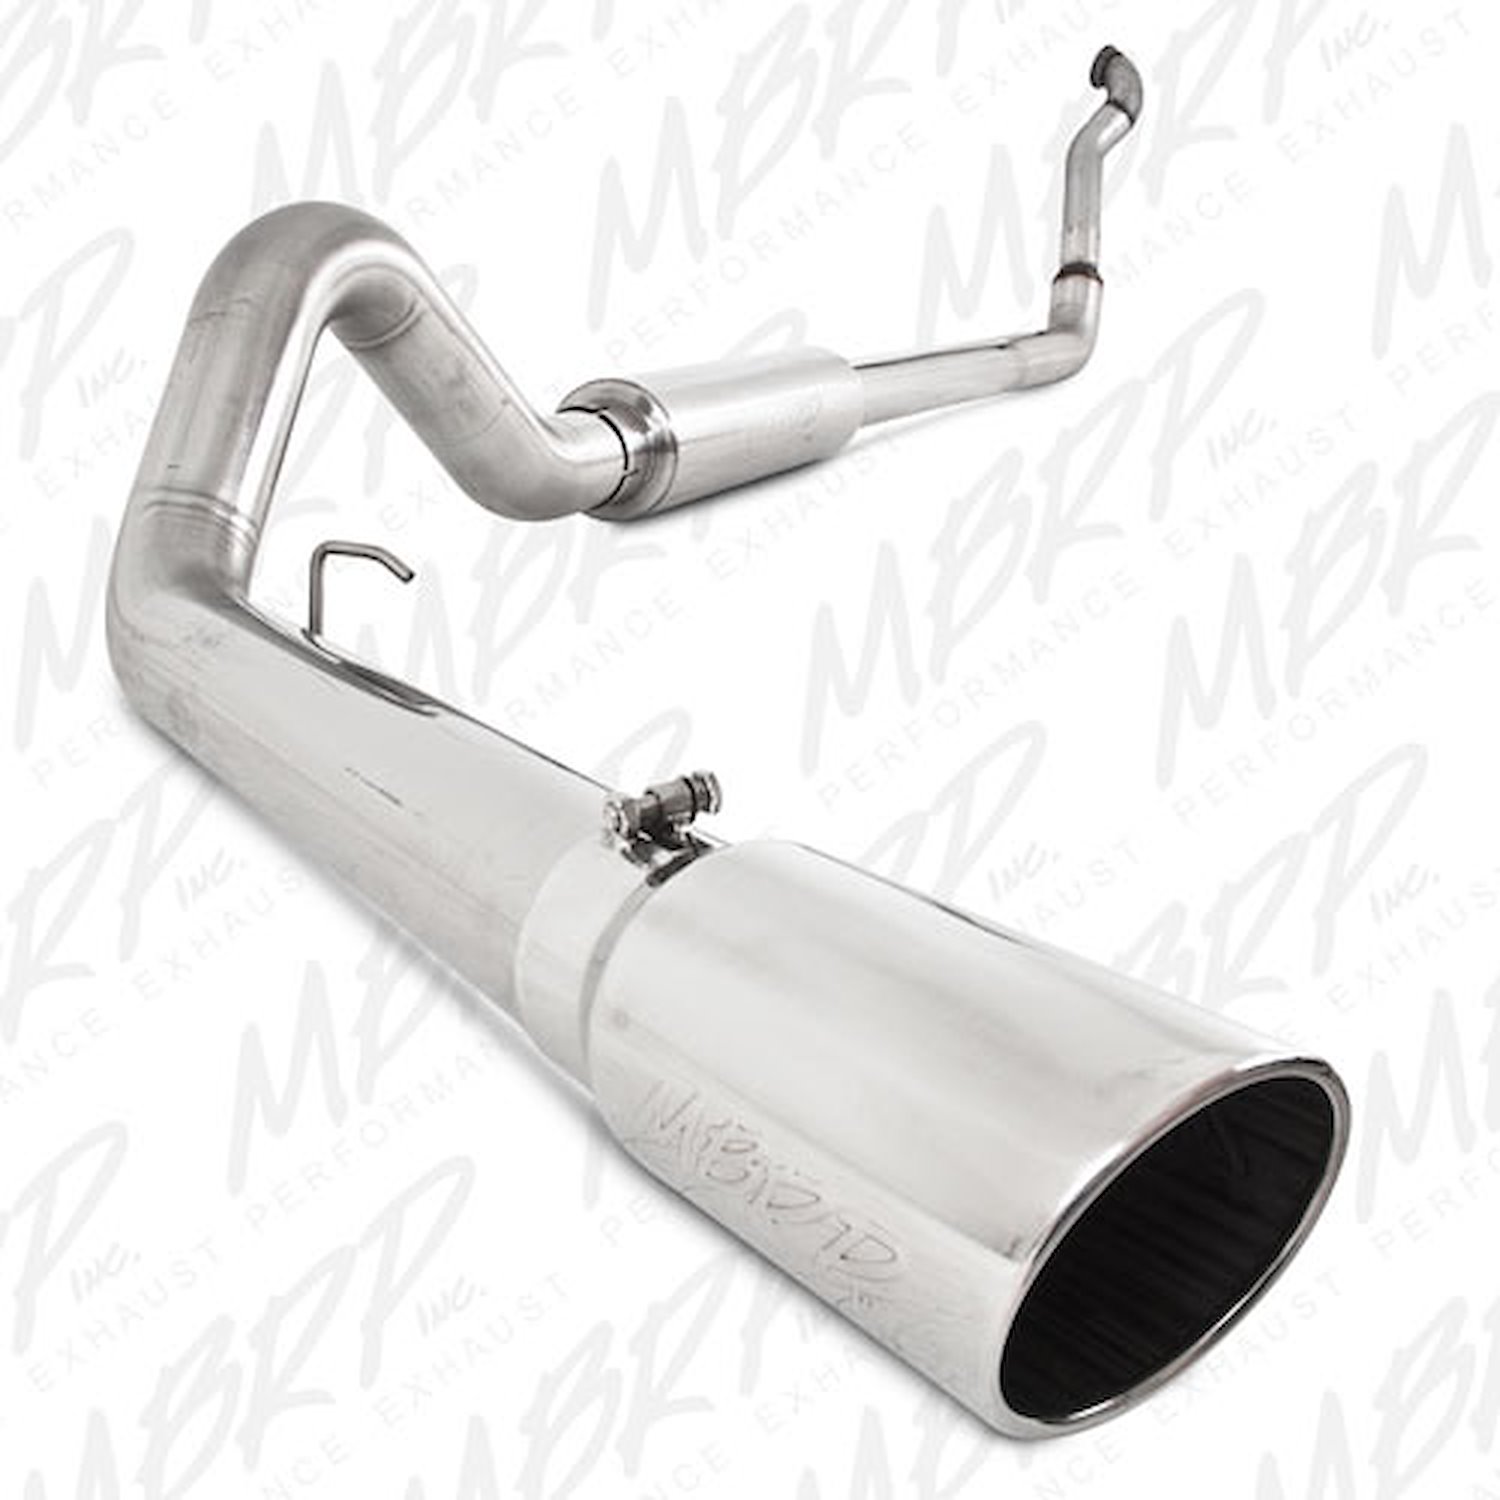 XP Series Exhaust System 1994-97 Ford F-250/F-350 Powerstroke 7.3L